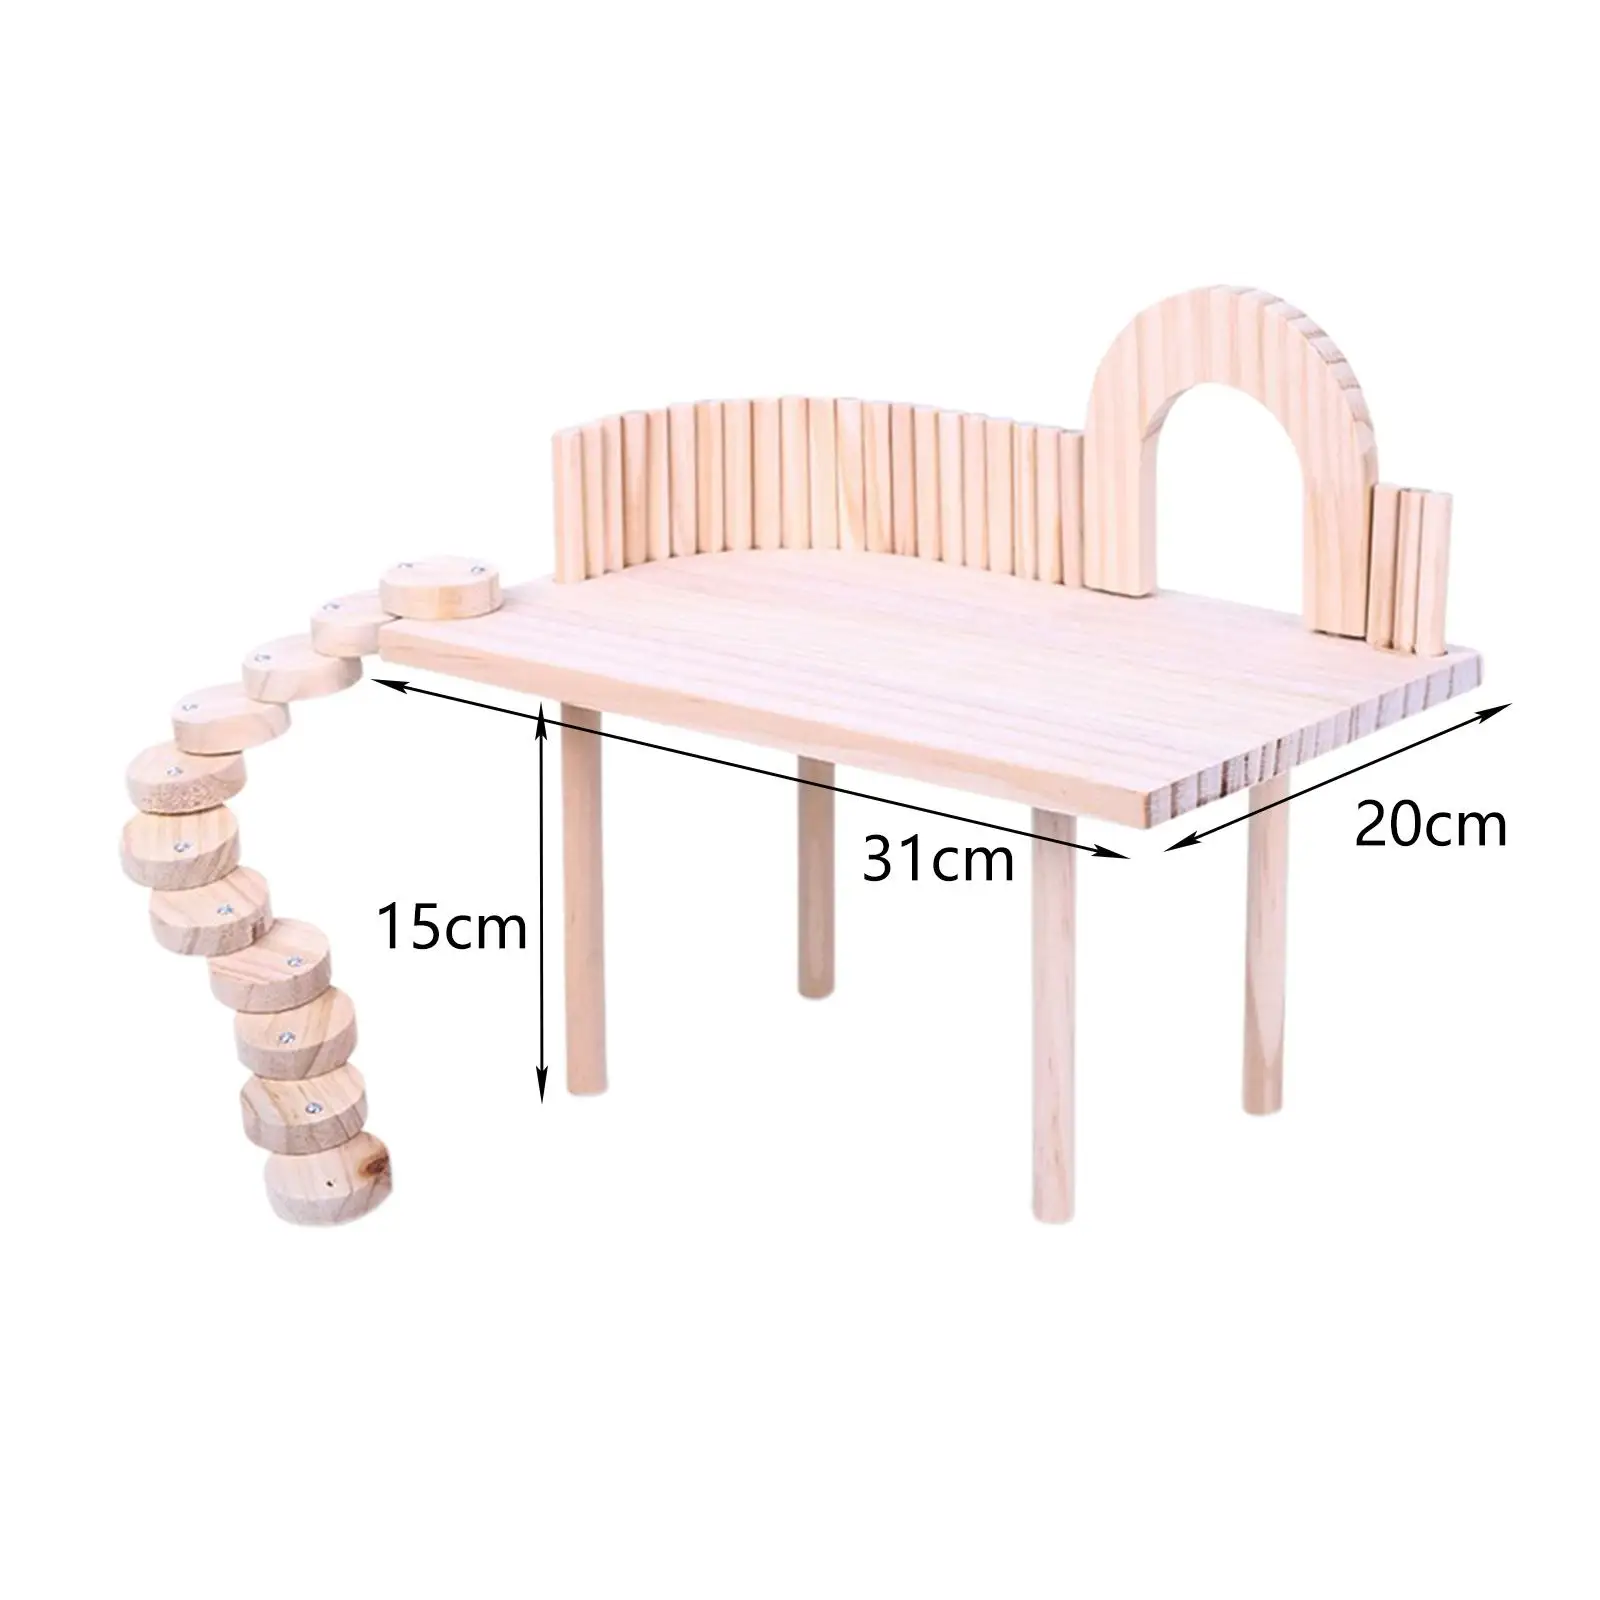 Natural Wood Platform Stand Shelf Board Cage Accessories for Rat Dwarf Hamster Chewing